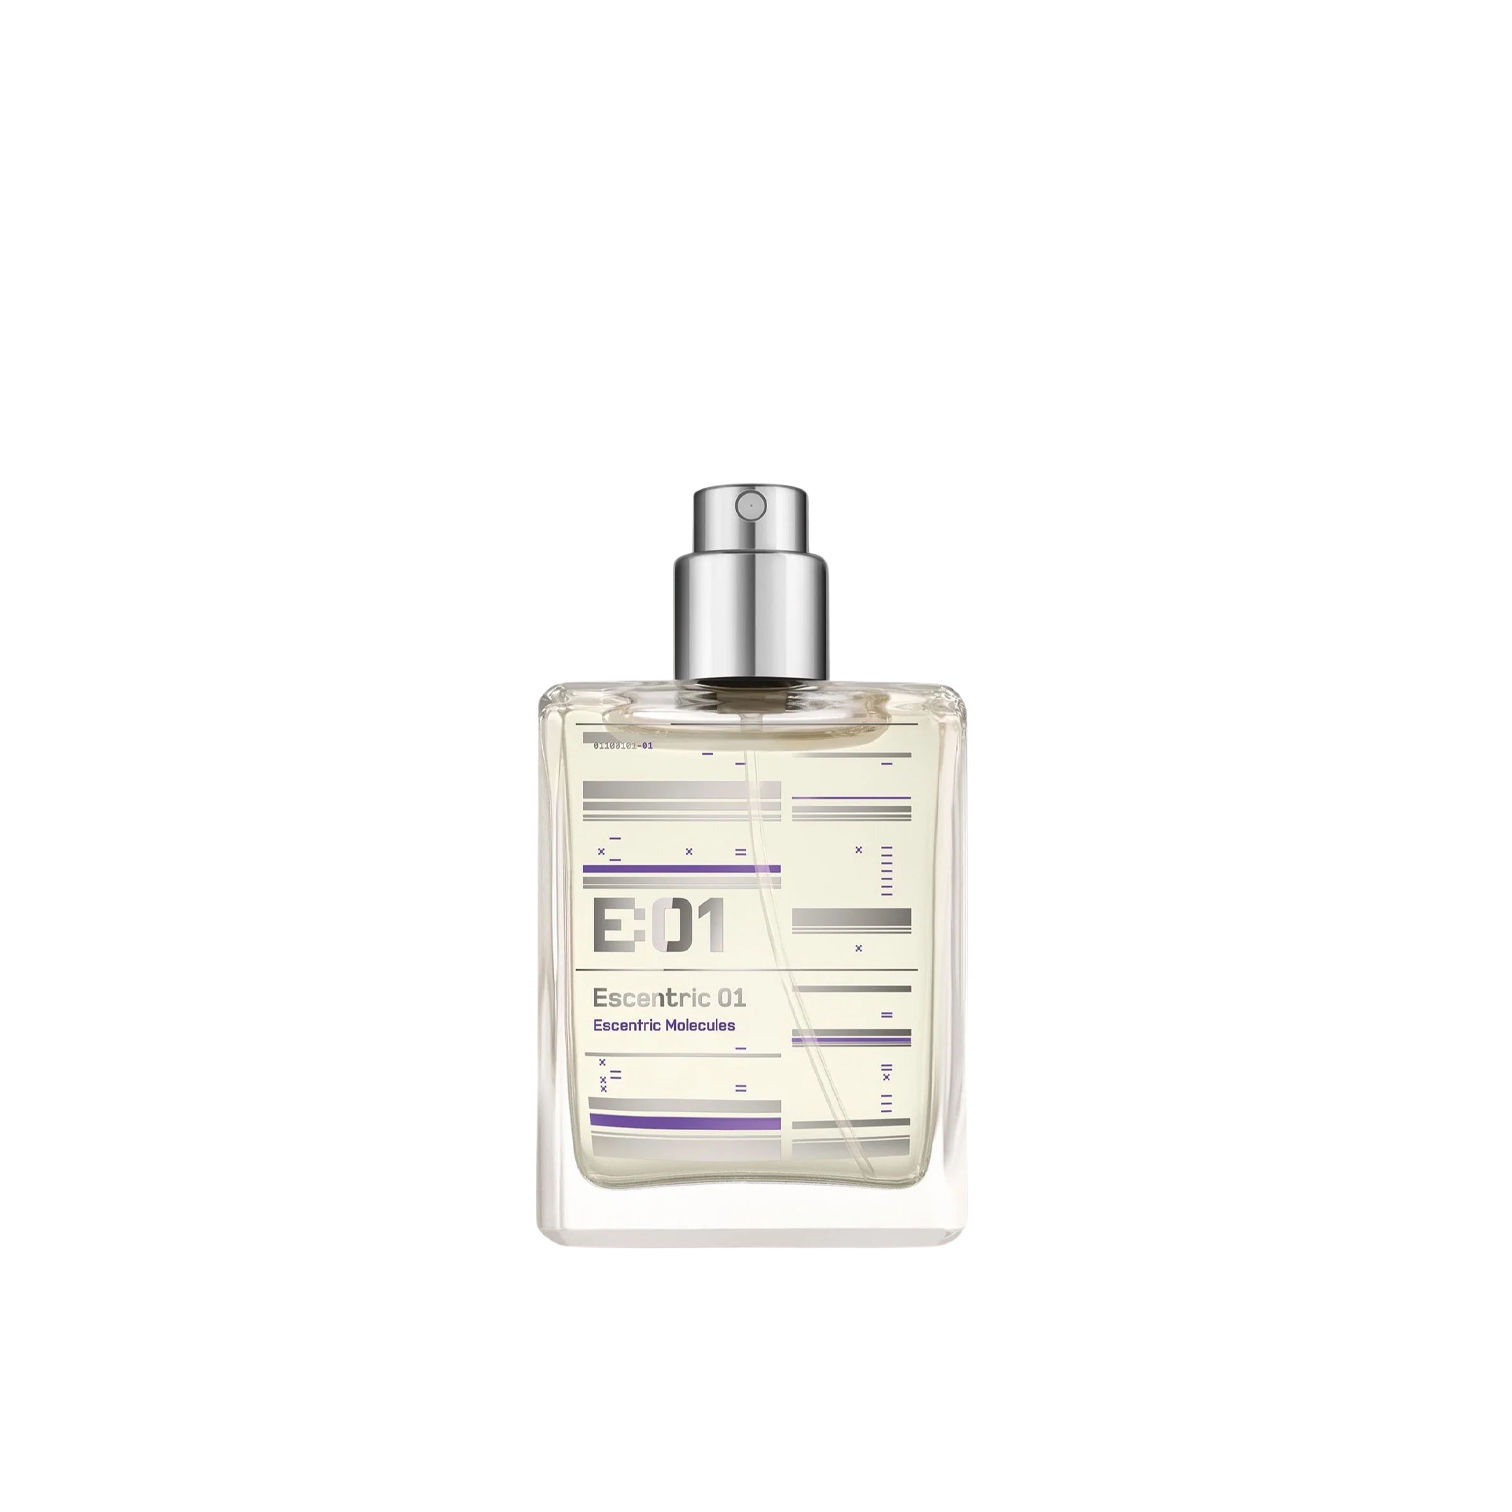 A practical 30ml refill bottle of Escentric Molecules' Escentric 01 Refill 30ml Perfume on a white background.